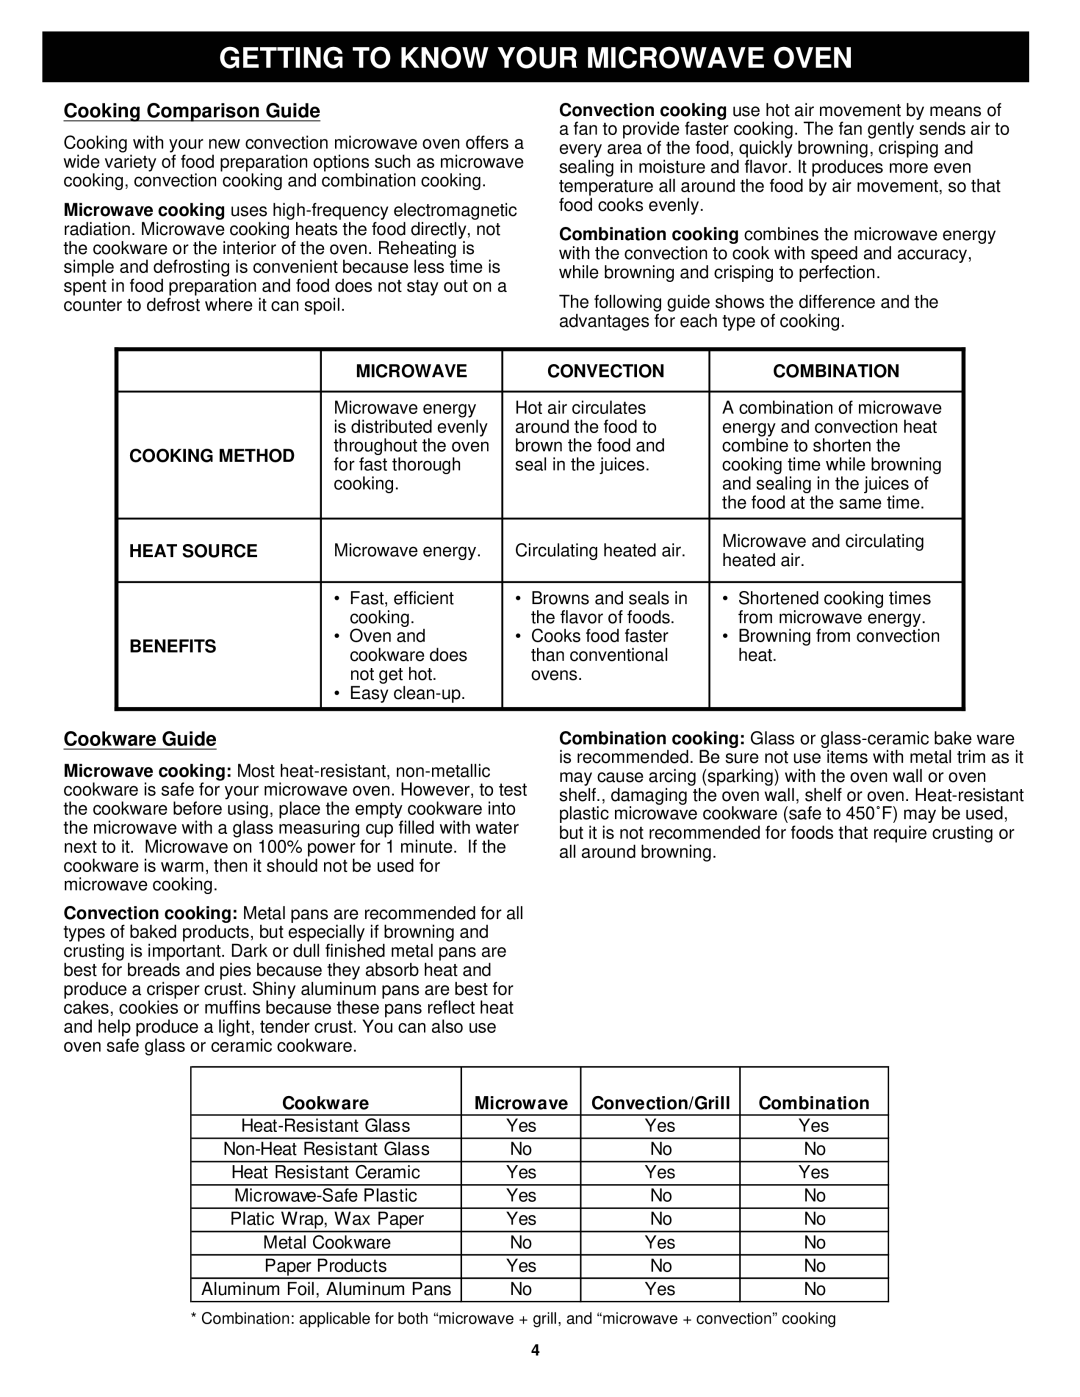 Euro-Pro K5345B owner manual Getting To Know Your Microwave Oven, Cooking Comparison Guide, Cookware Guide 